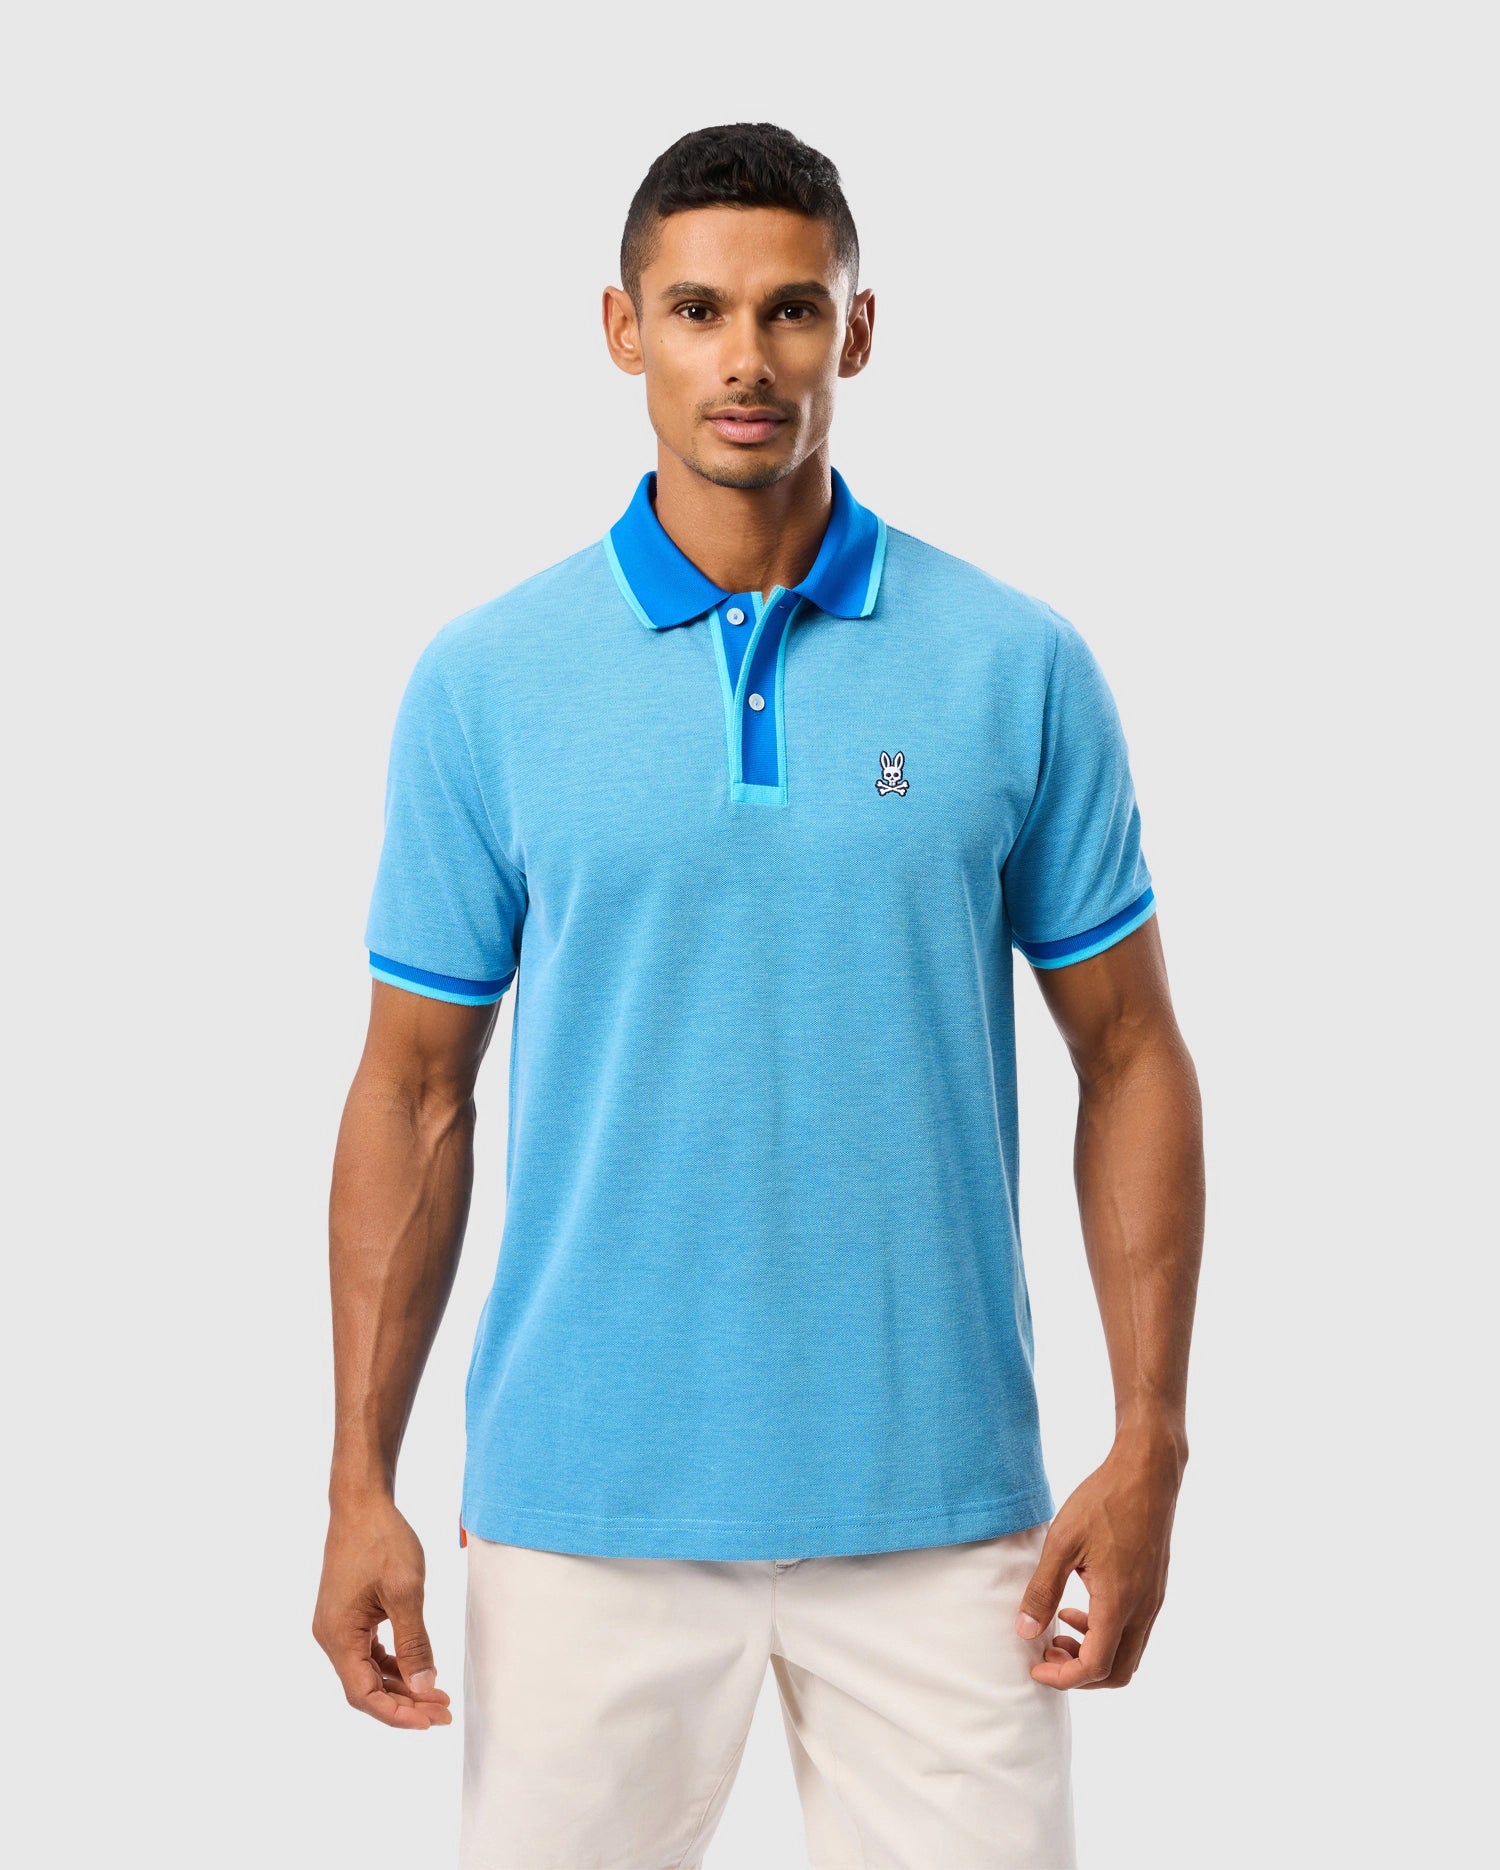 A man is wearing a light blue Psycho Bunny MENS WOODWAY OXFORD POLO - B6K405C200 with dark blue accents on the collar and sleeves. The Pima cotton-blend shirt features a two-button placket and has a small embroidered patch of a Bunny cartoon character on the left chest. He is also wearing white pants. The background is plain and gray.